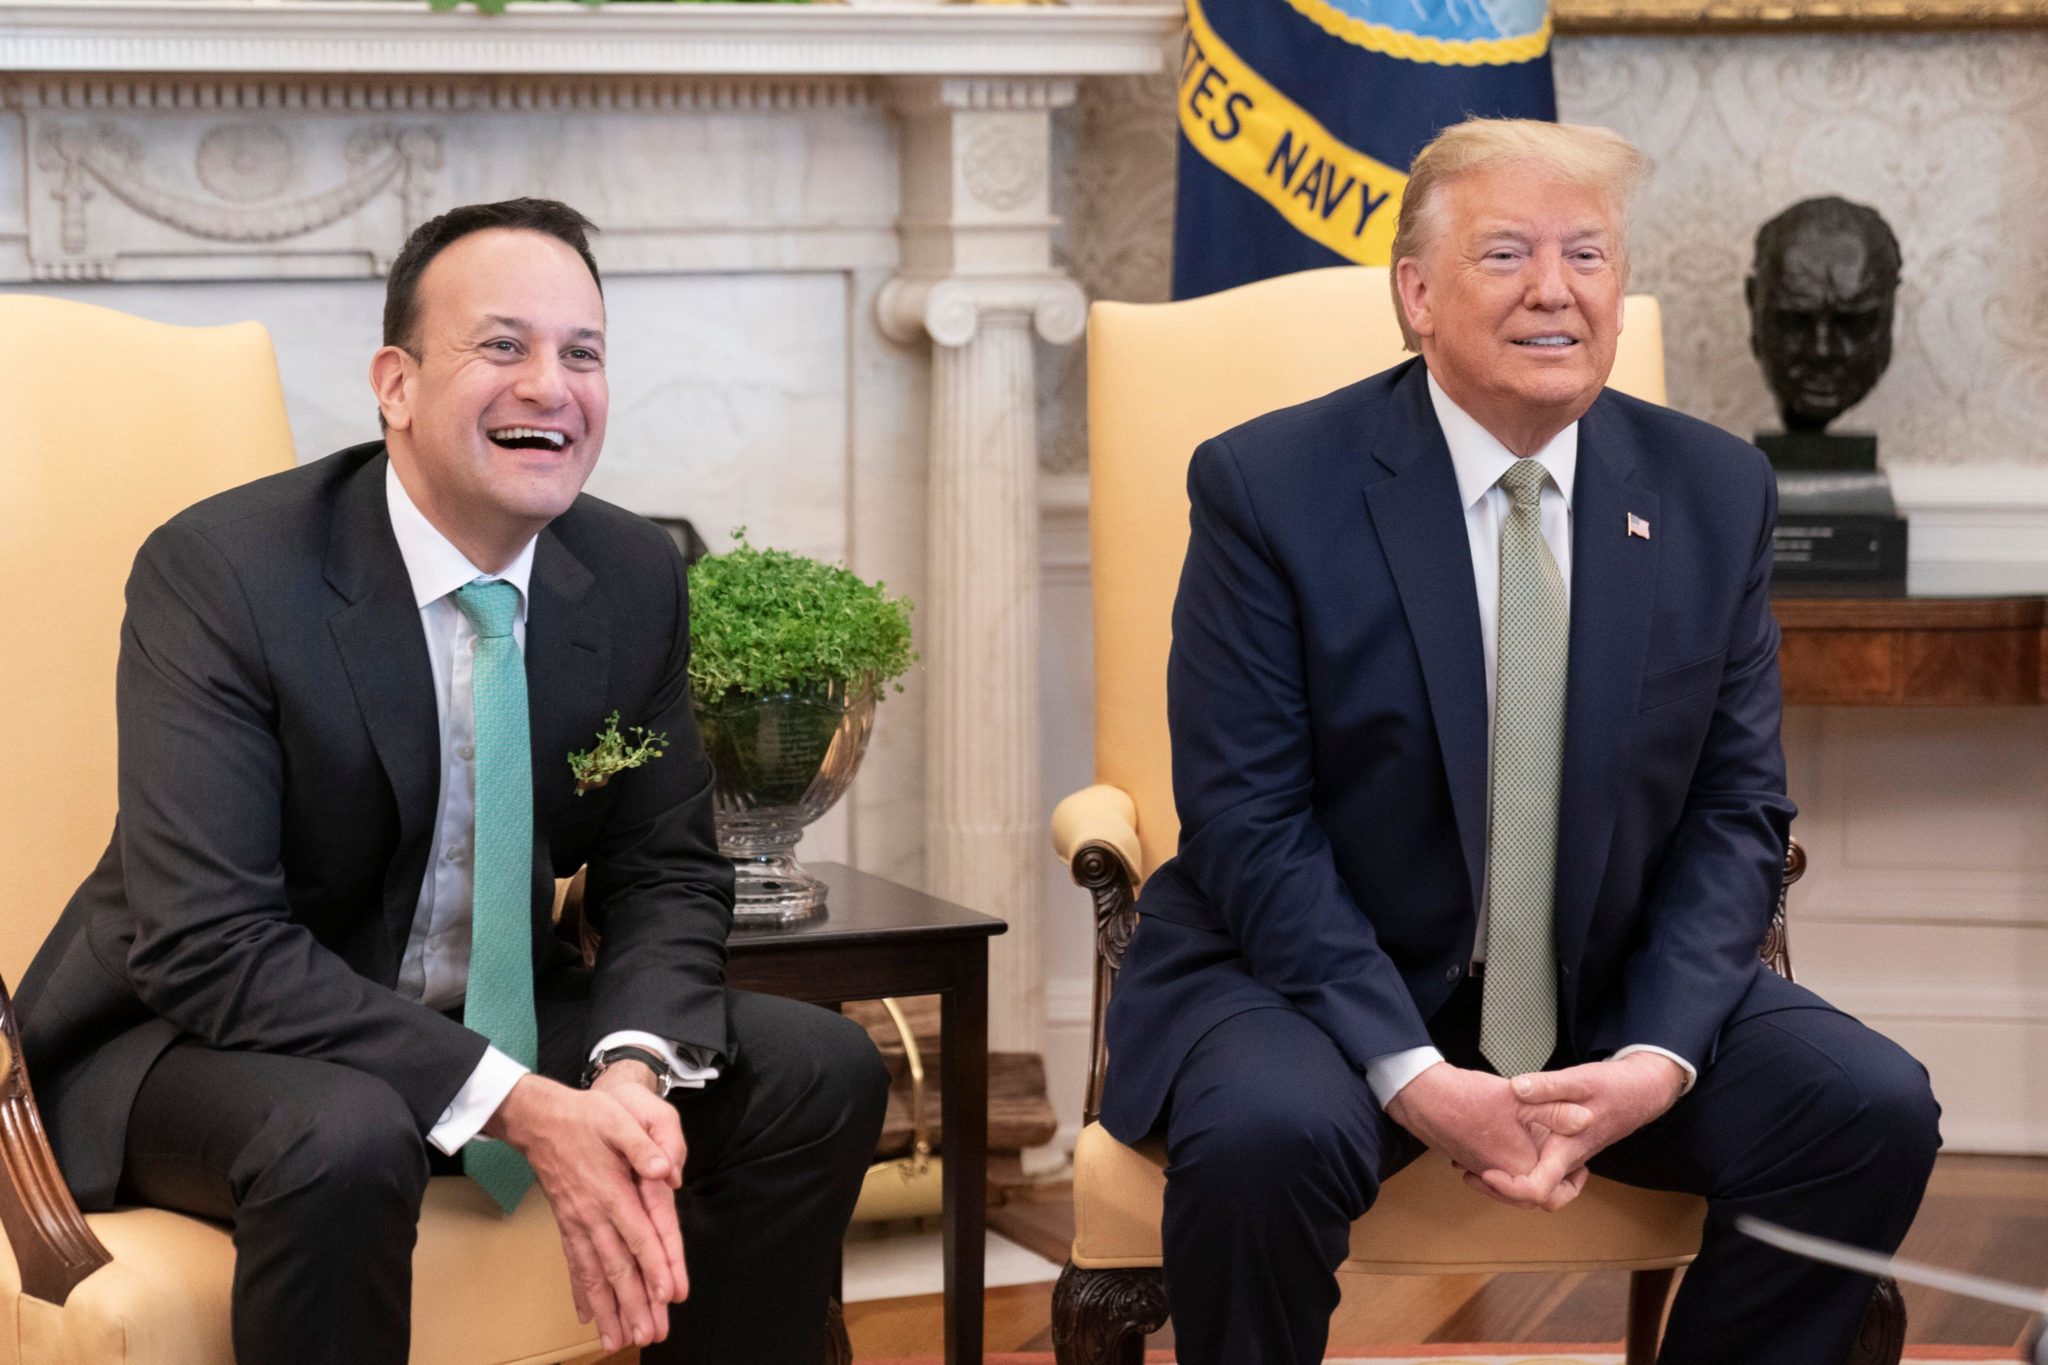 US President Donald Trump and Taoiseach Leo Varadkar meet for the annual St Patricks Day visit in the Oval Office.